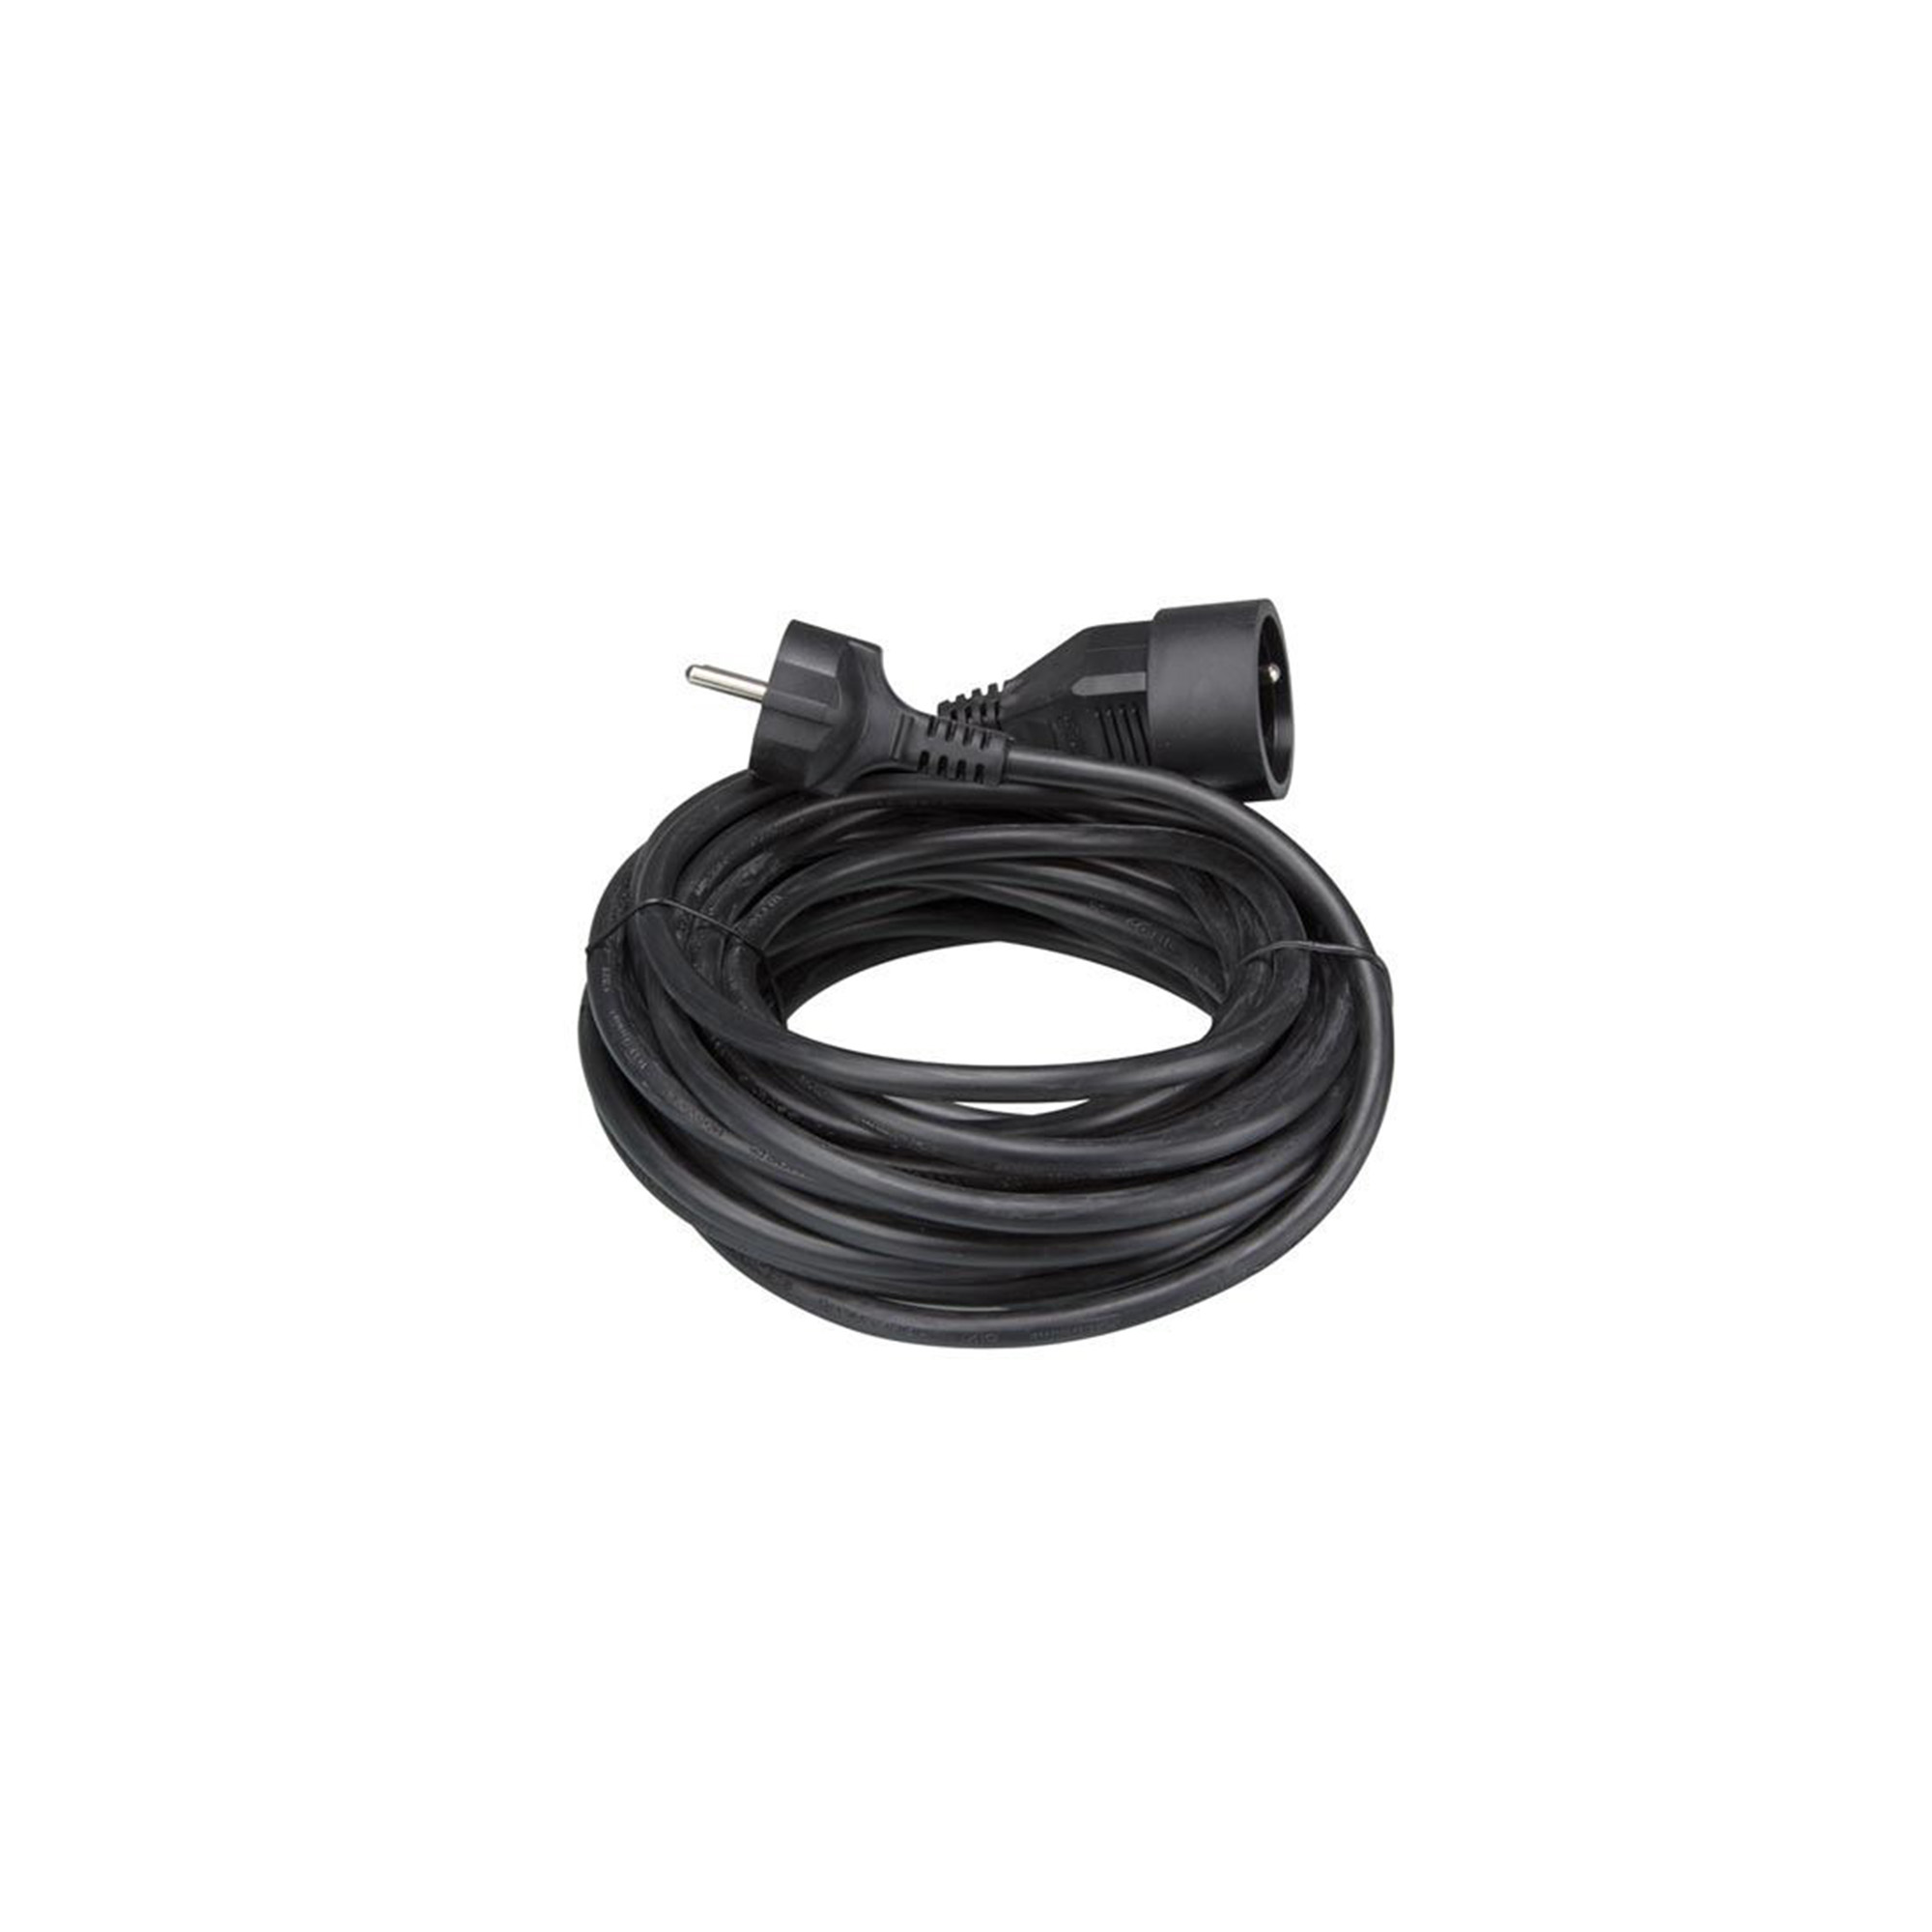 Manfrotto Extension cable 16A - 10m available to rent / verhuur / location at 50.8 Studio • Belgïe, Belgique, Belgium, Grip, Huur, Location, Louer, Manfrotto, Photo, Rent, Rental, Stand, Studio, Verhuur, Video